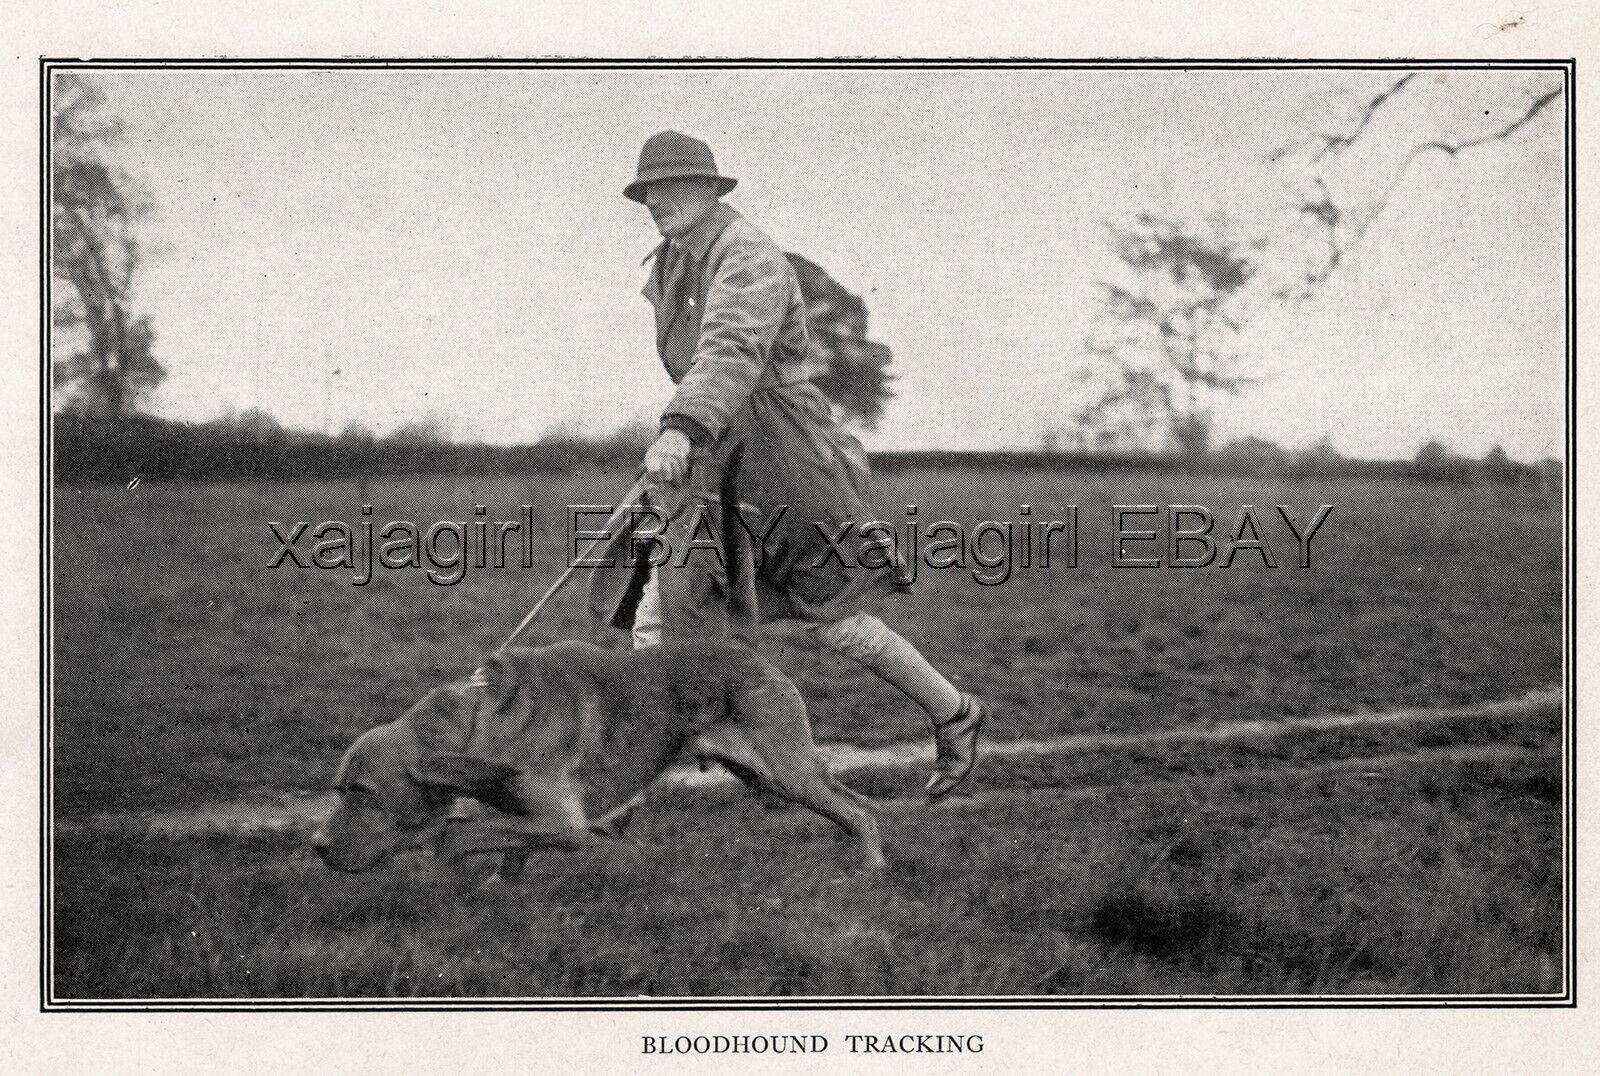 DOG Bloodhound Tracking Search Dog, Rare WWI Print c.1916 Antique Print